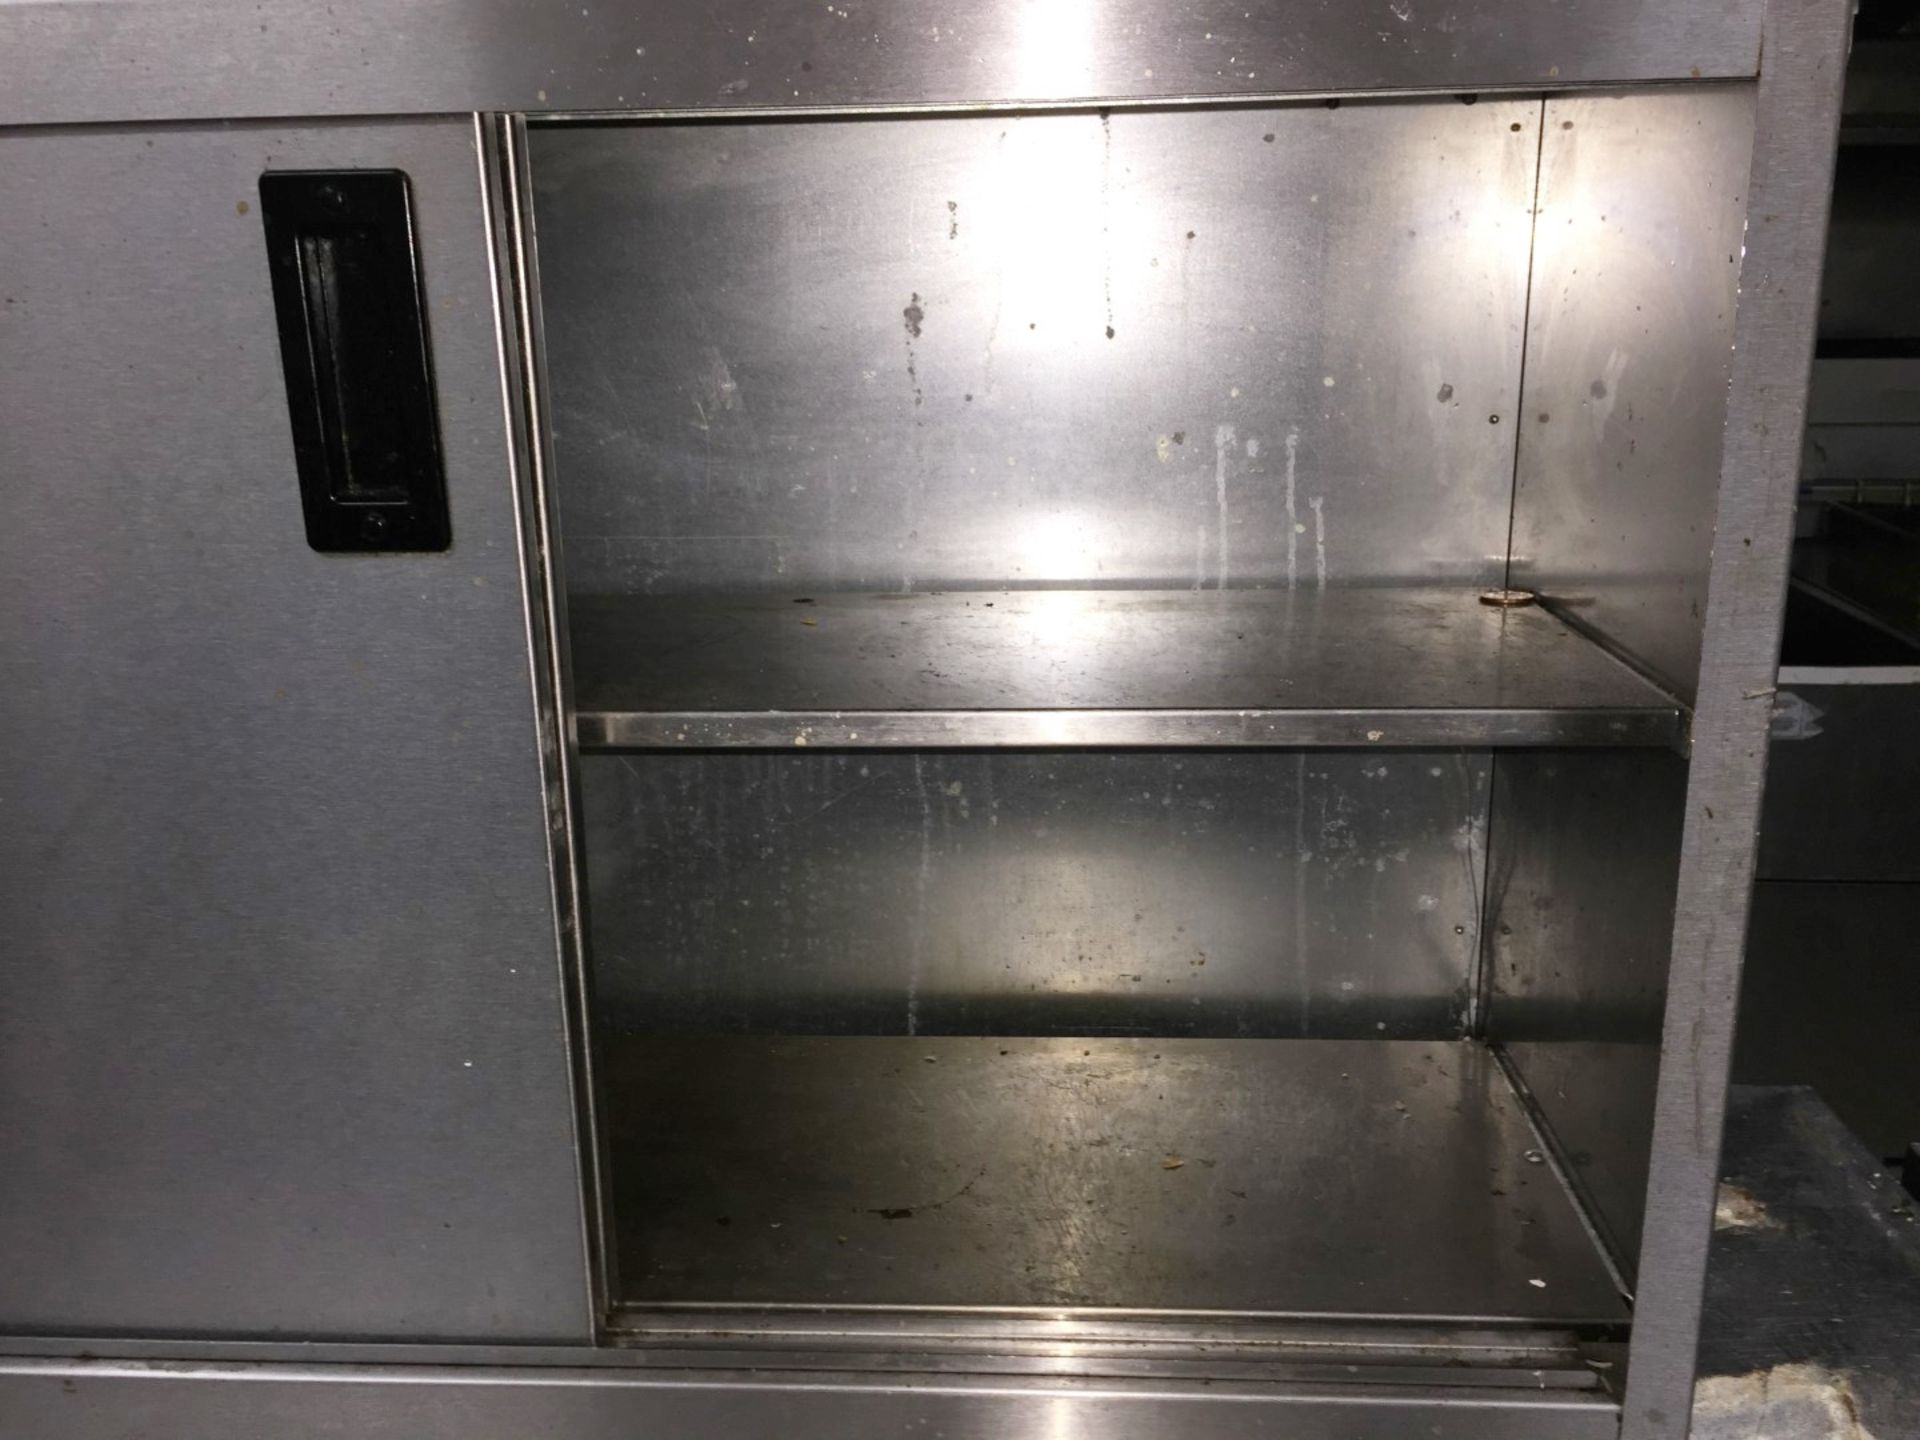 1 x Victor Earl Hot Cupboard - Model Number HED90100 - CL188 - Capacity 18 Plated Meals or 80 x - Image 4 of 6